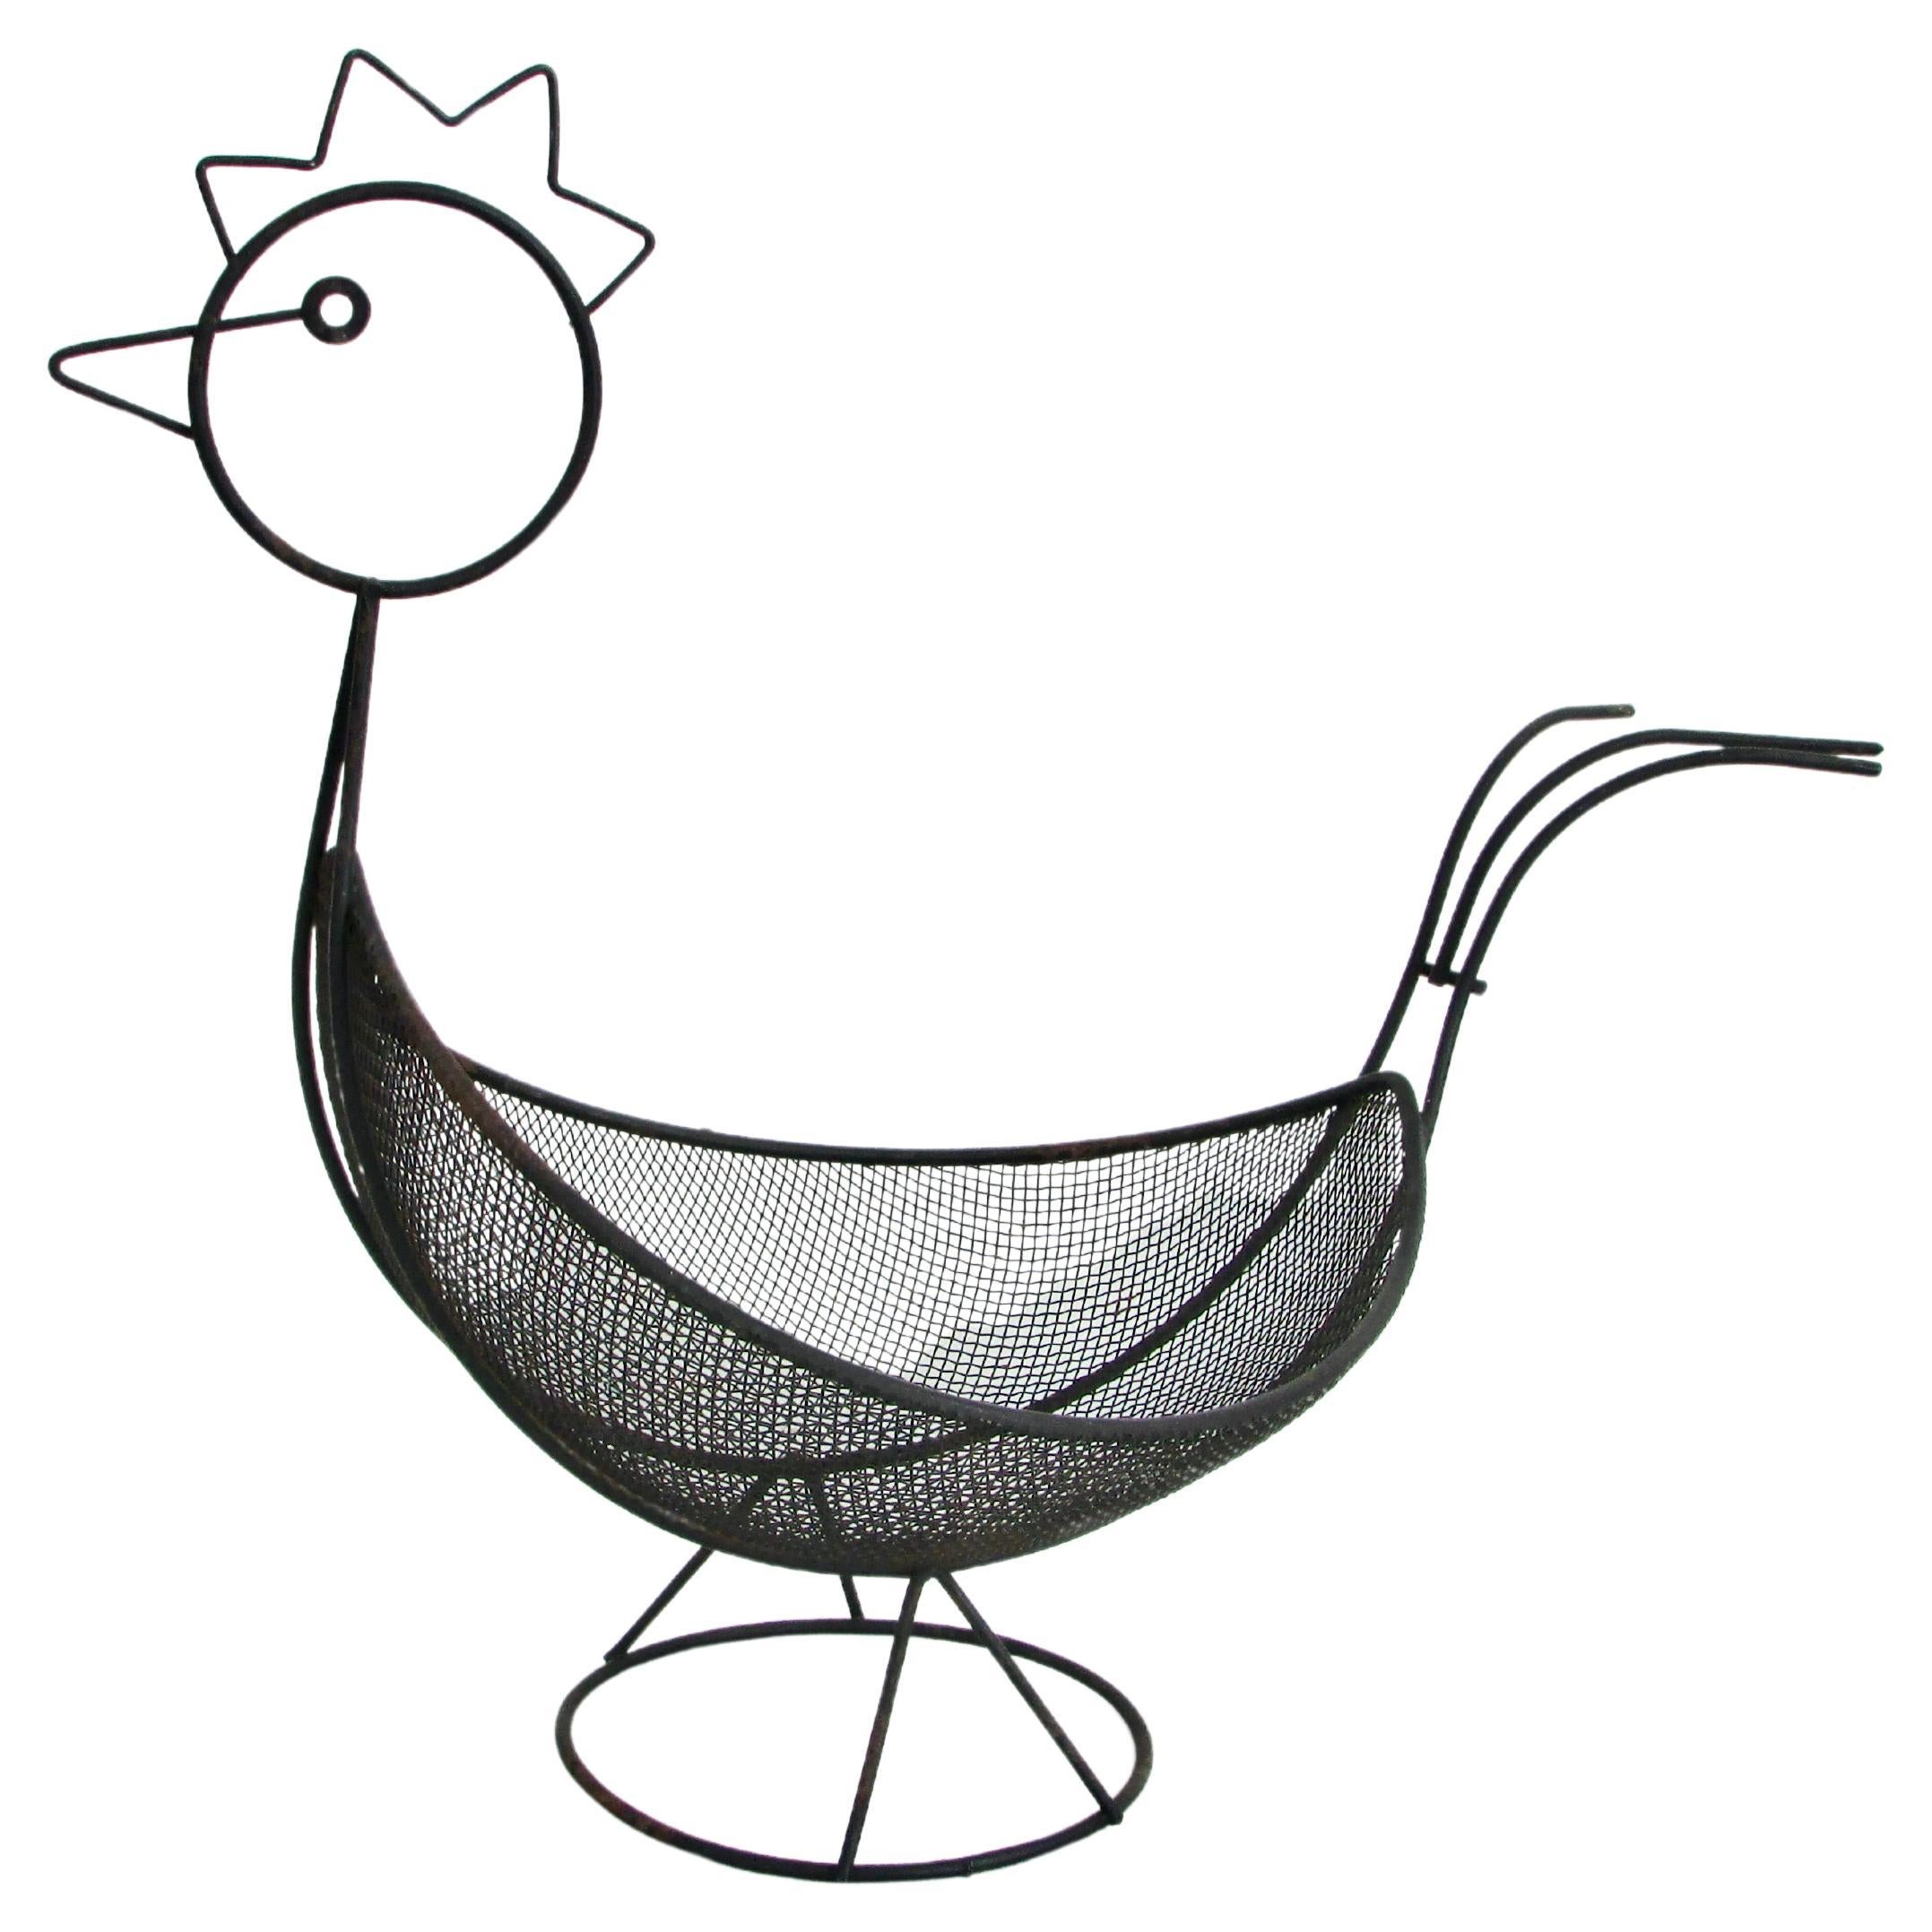 Weinberg style abstract chicken form black wrought wirework basket For Sale